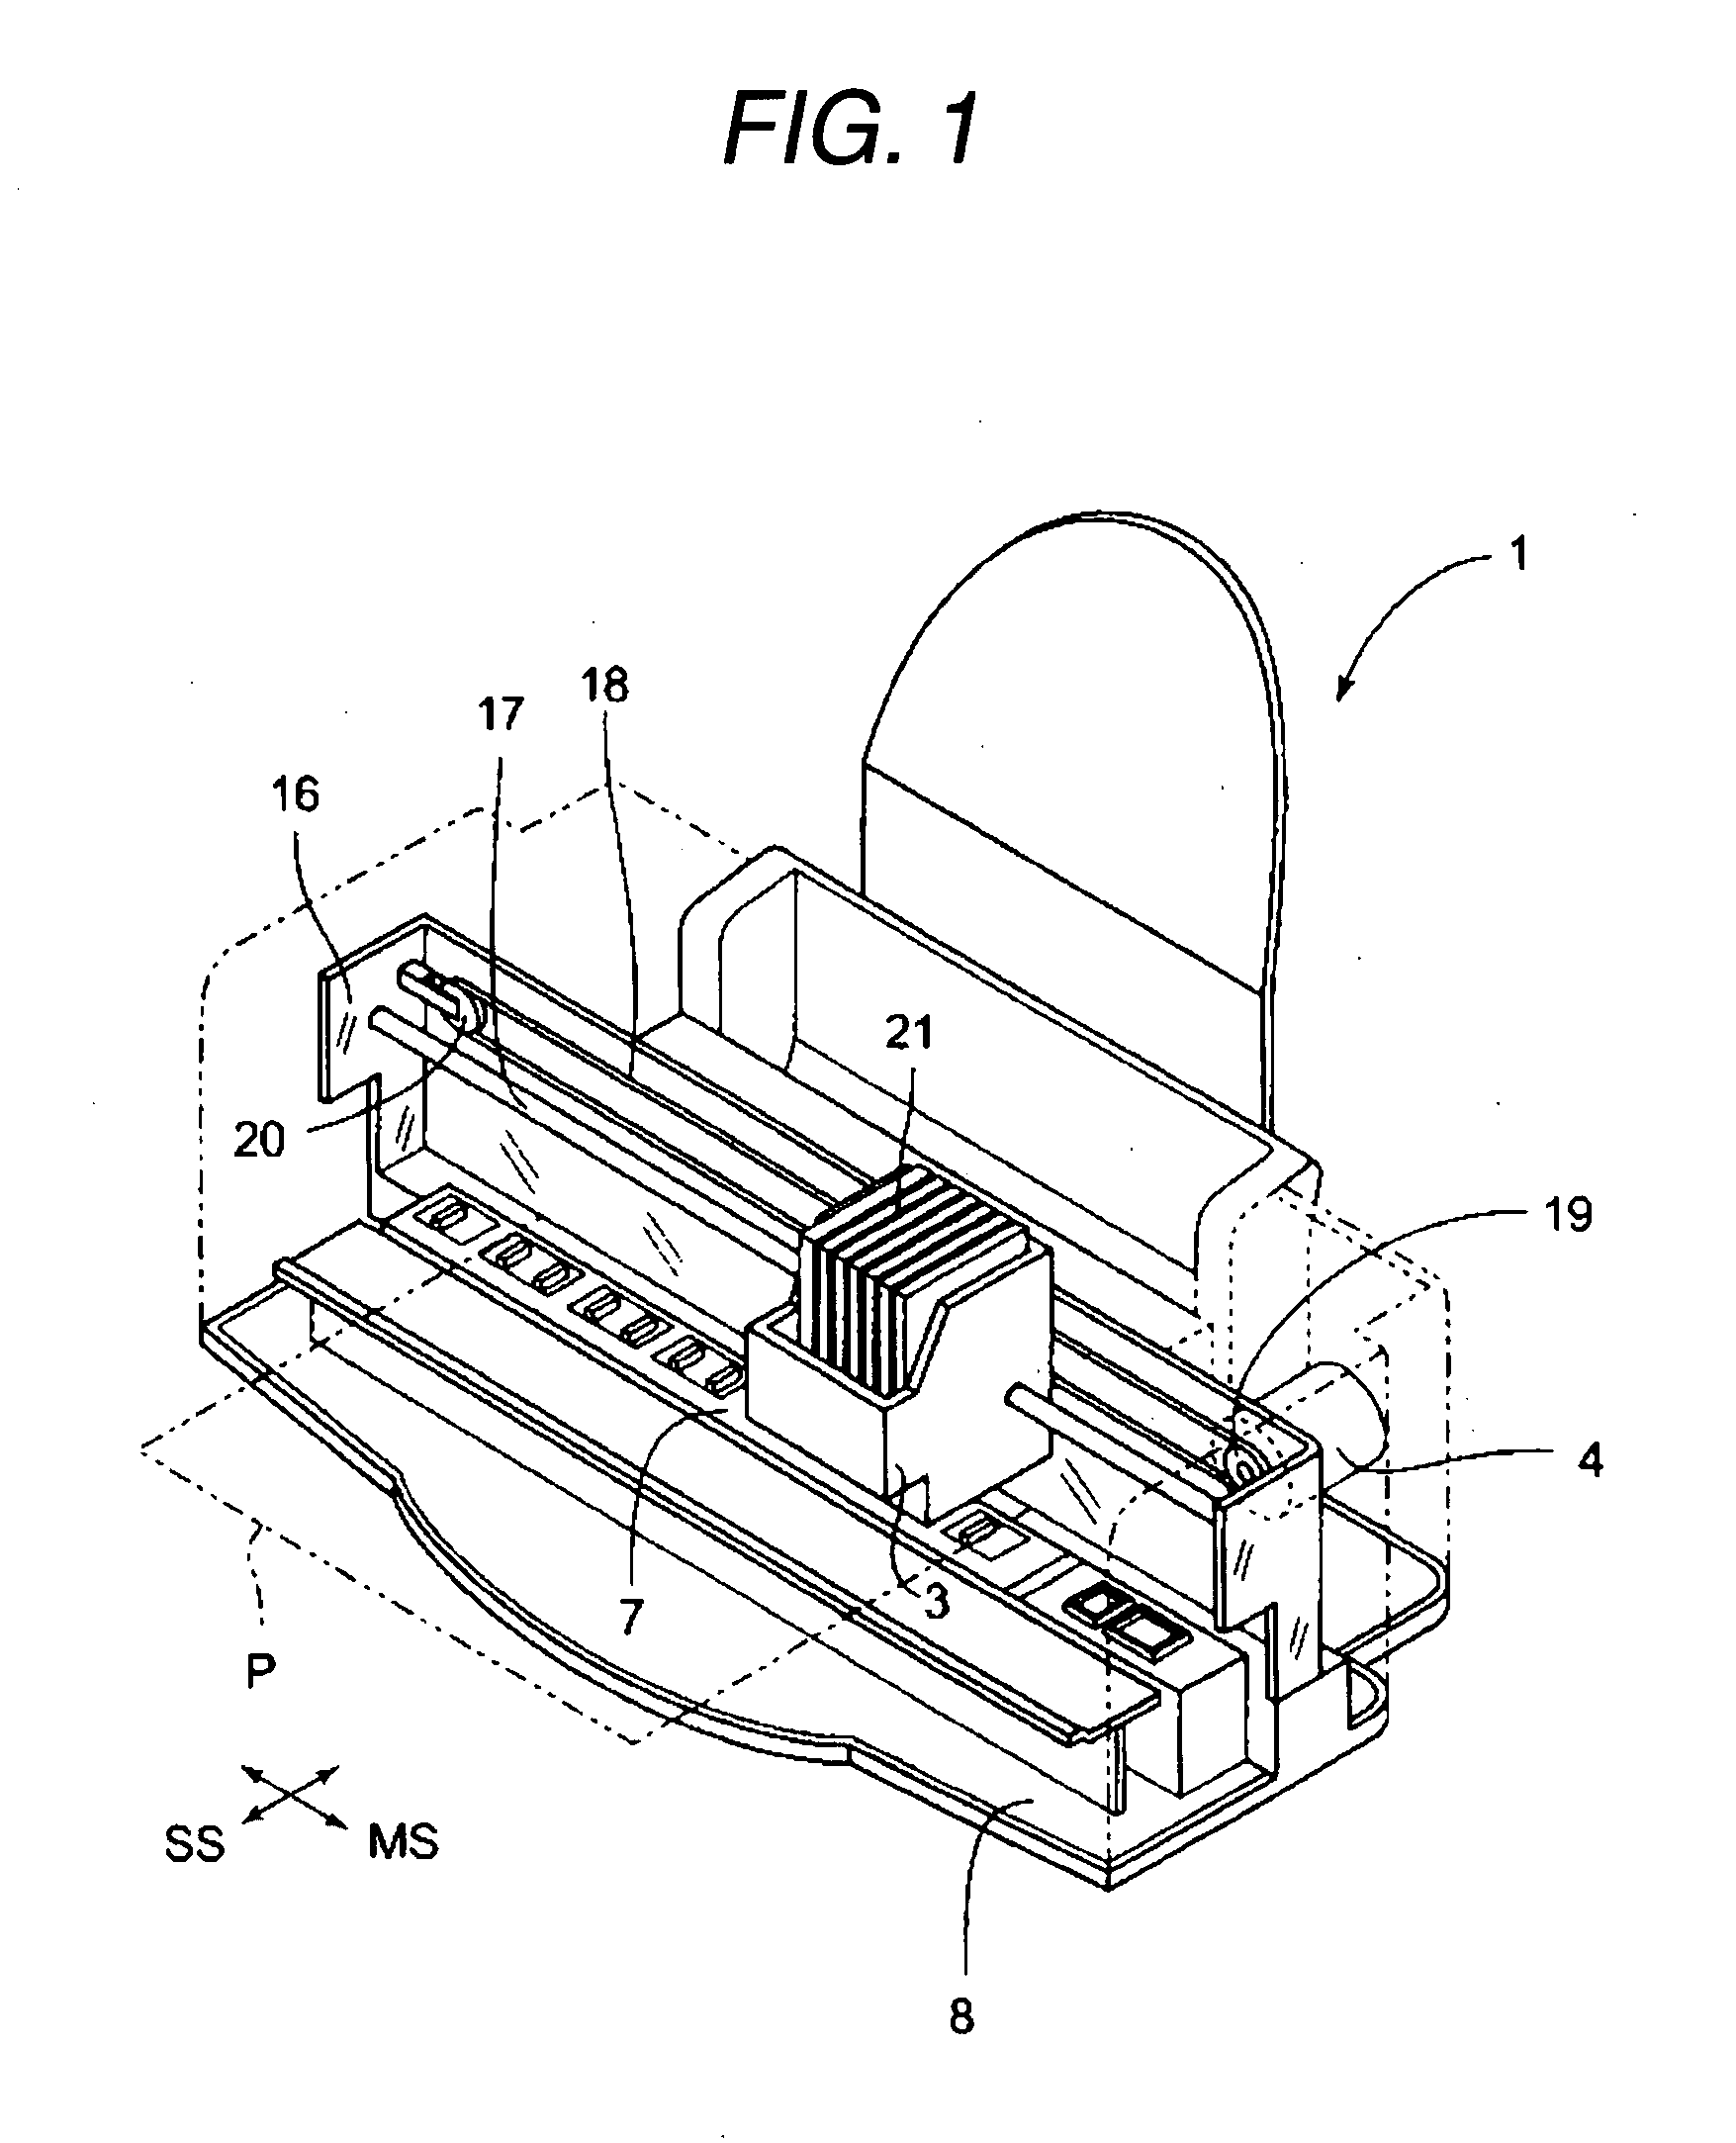 Method of controlling stepping motor, apparatus for controlling stepping motor, and printer